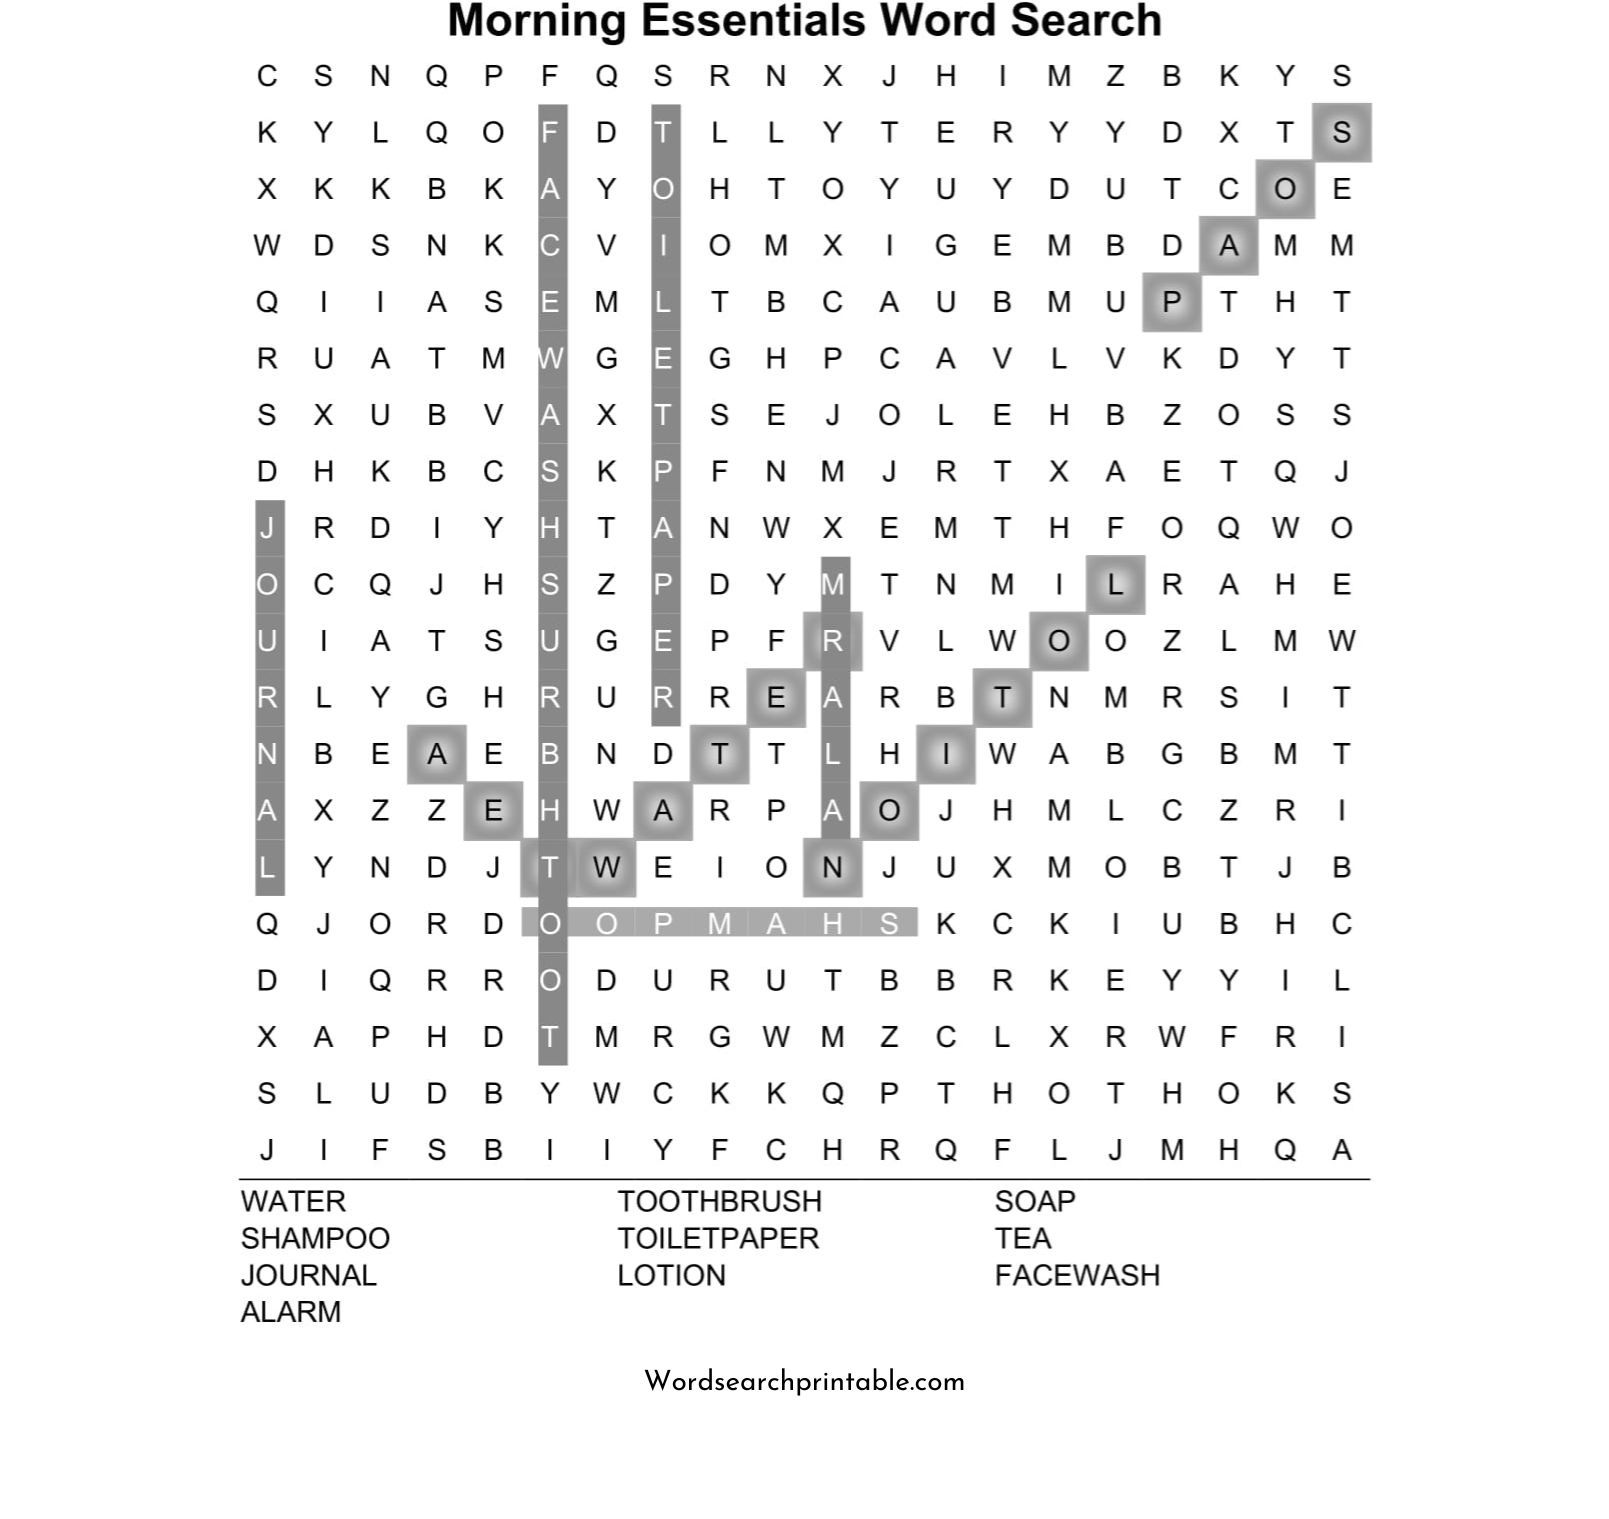 morning essentials word search puzzle solution